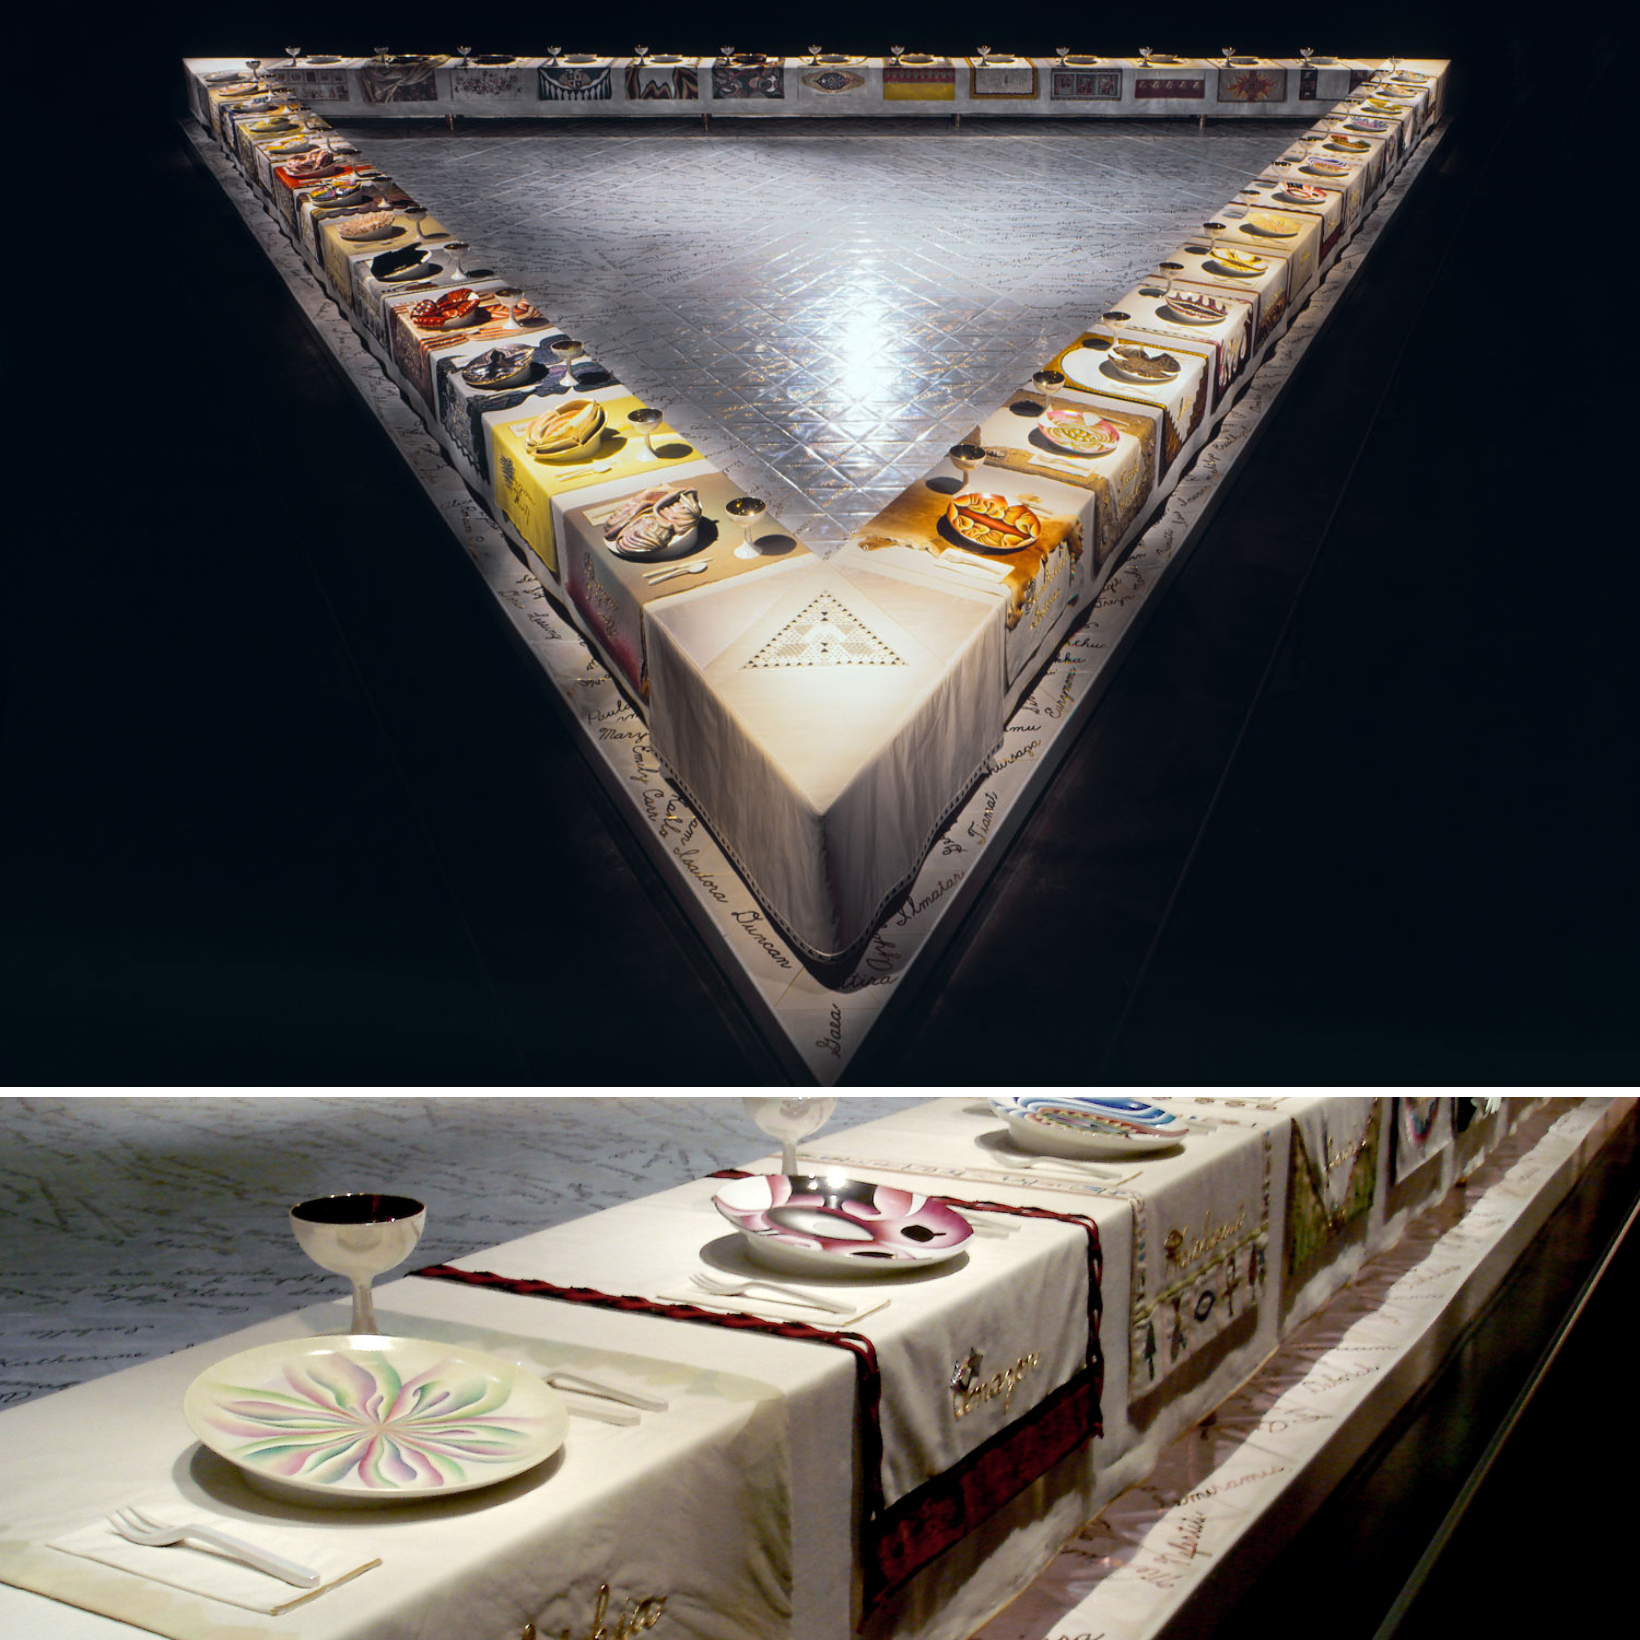 Dinner Party by Judy Chicago